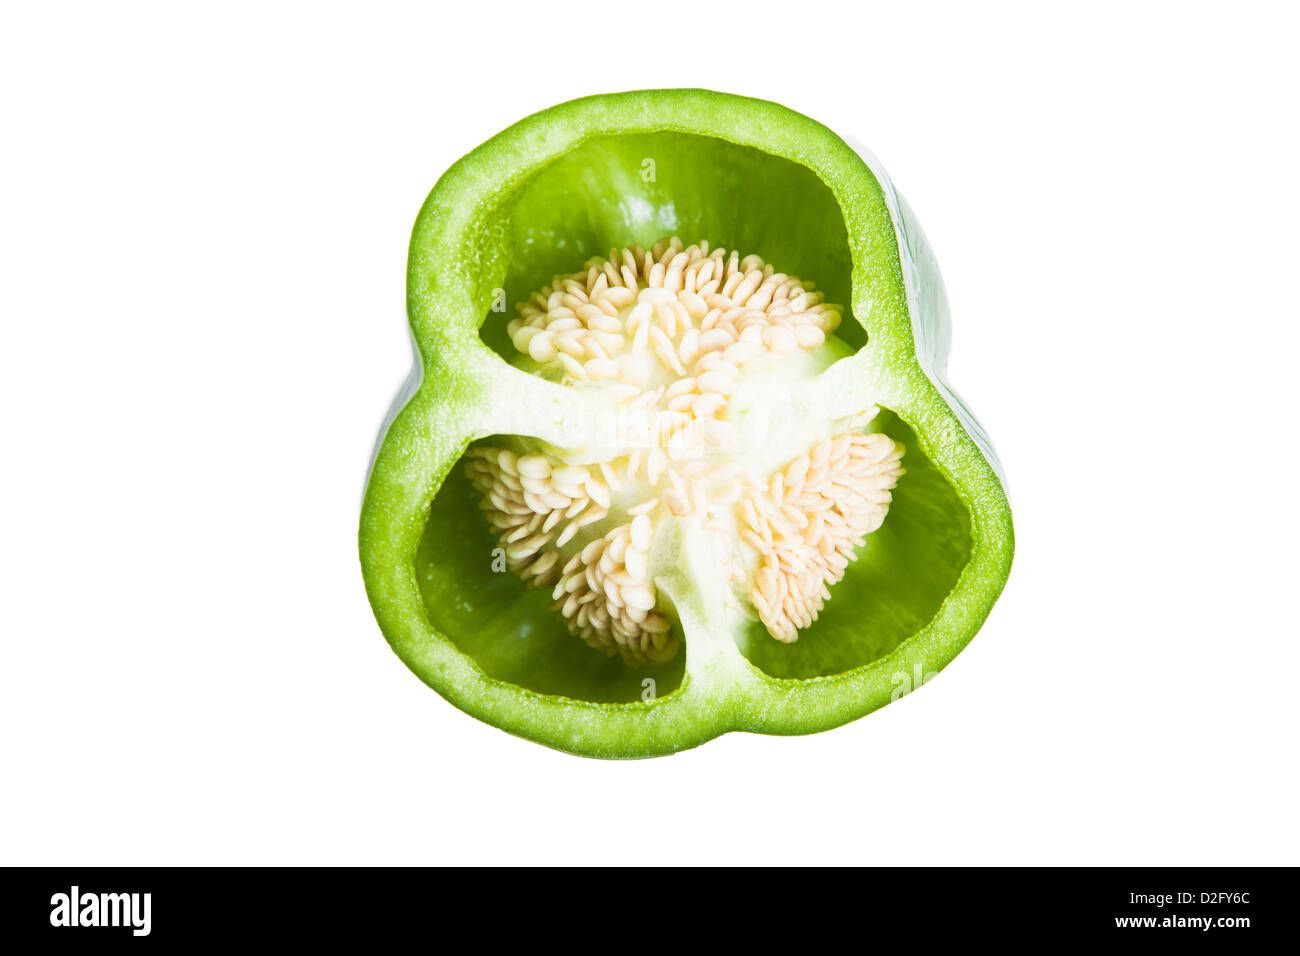 Close-up of cross section of green bell pepper Stock Photo